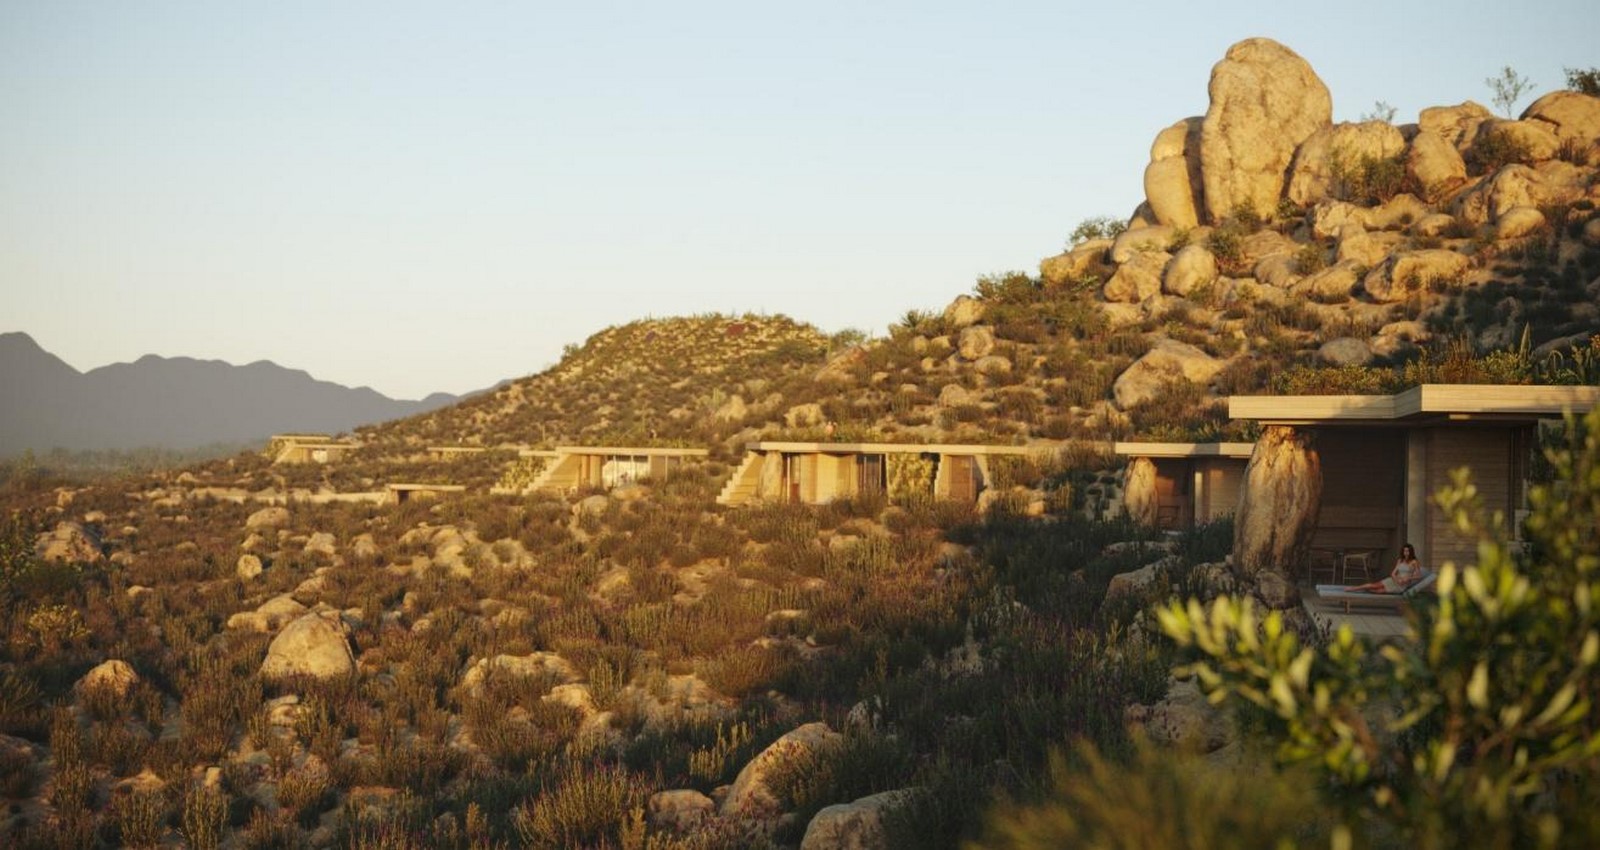 Ummara resort with 28 villas embedded in Mexican hills unveiled by Rojkind Arquitectos - Sheet3